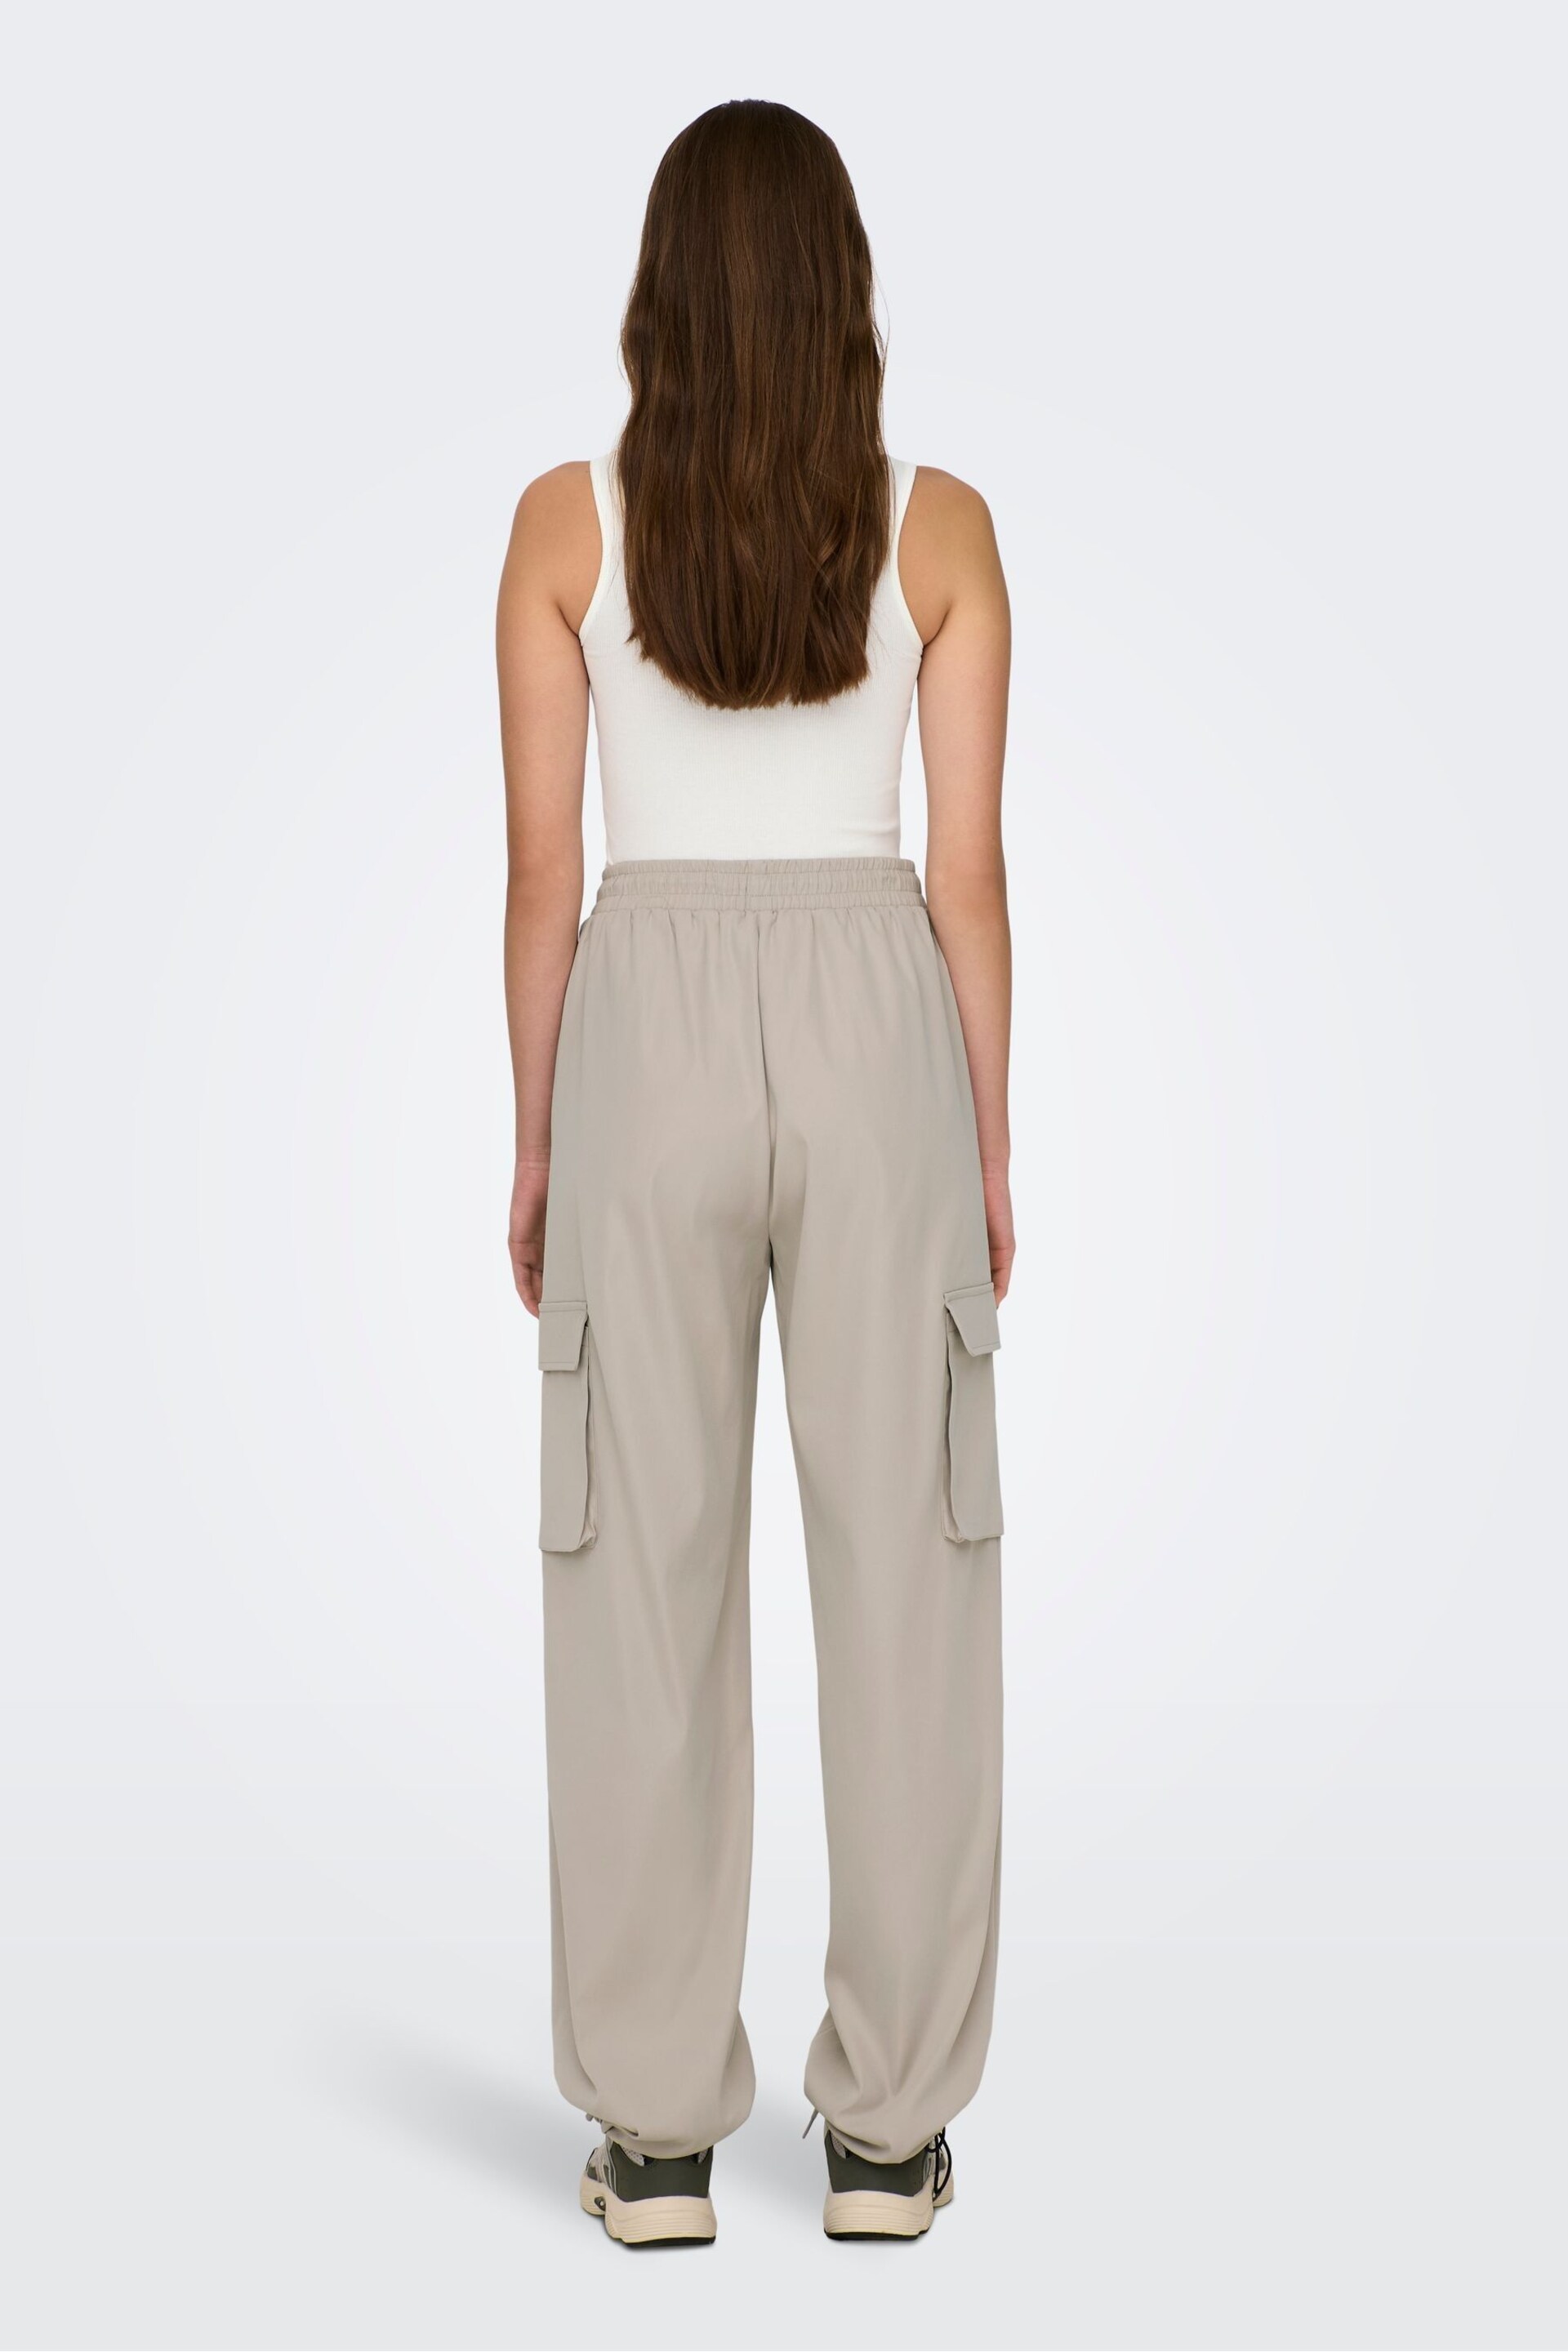 ONLY Cream Cargo Trouser - Image 4 of 5